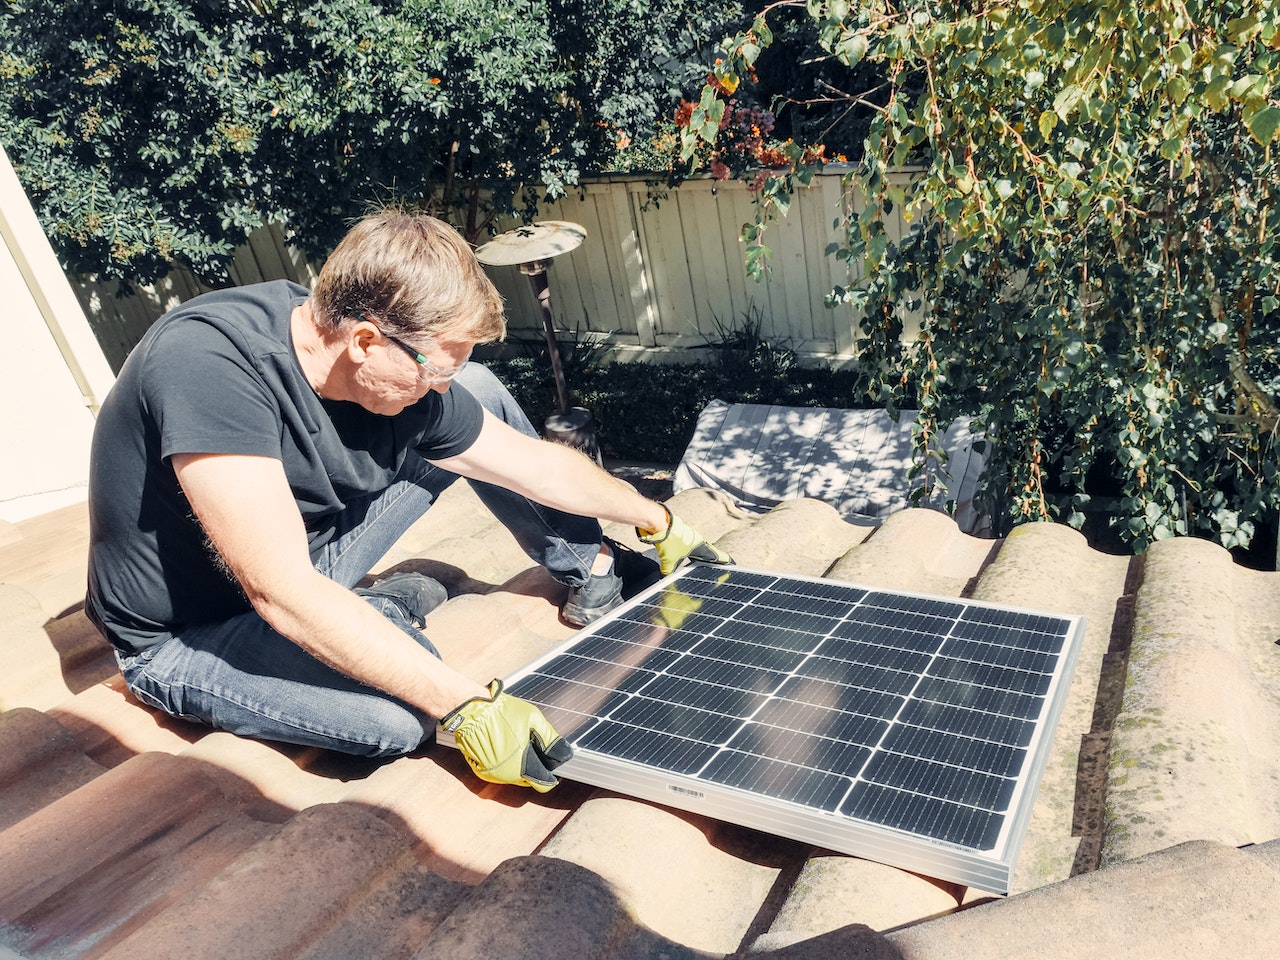 What you need to know about installing solar panels on your roof